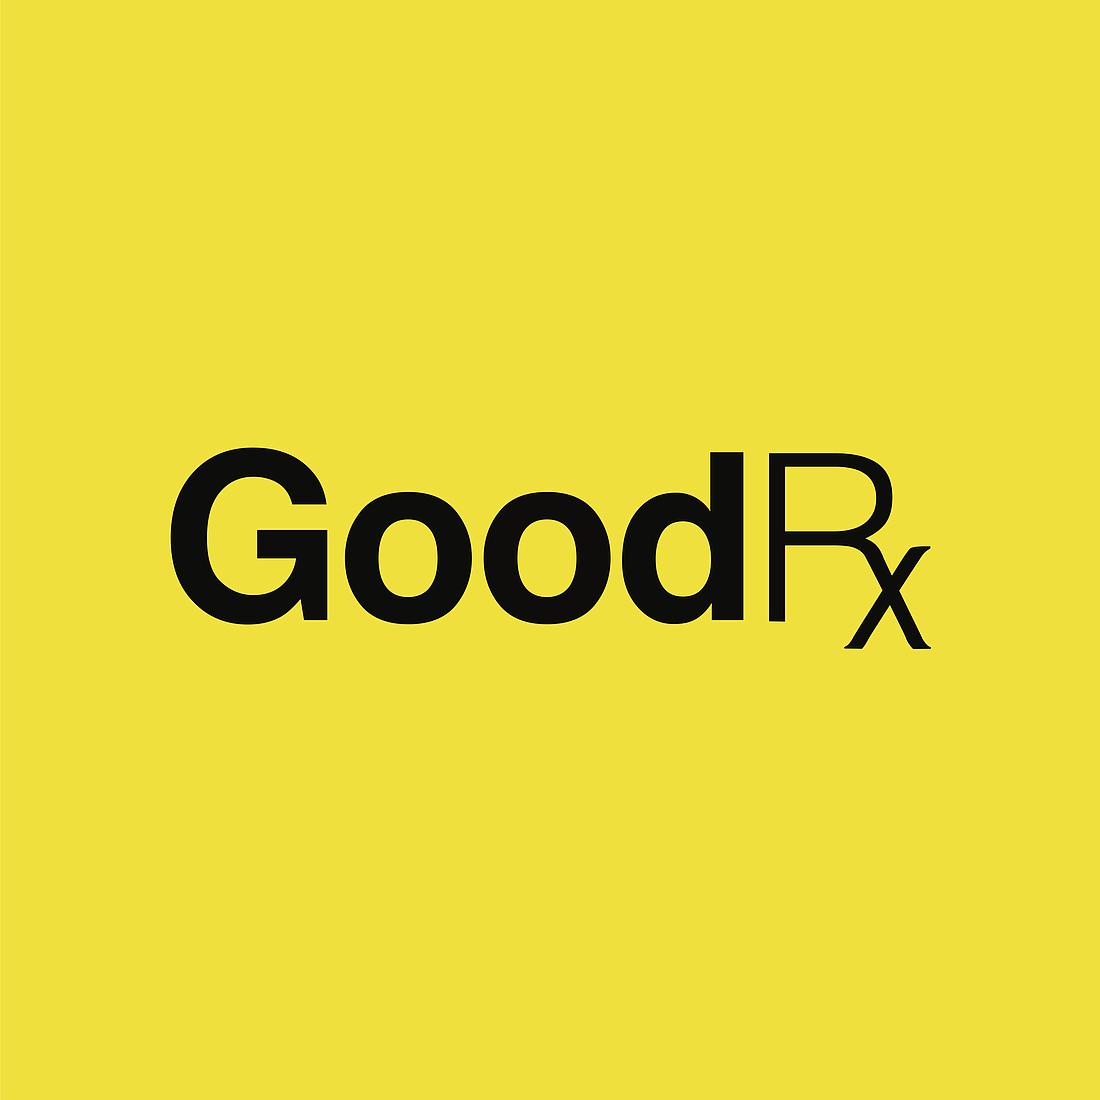 GoodRx is a service that allows customers to find the cheapest price for prescription drugs.